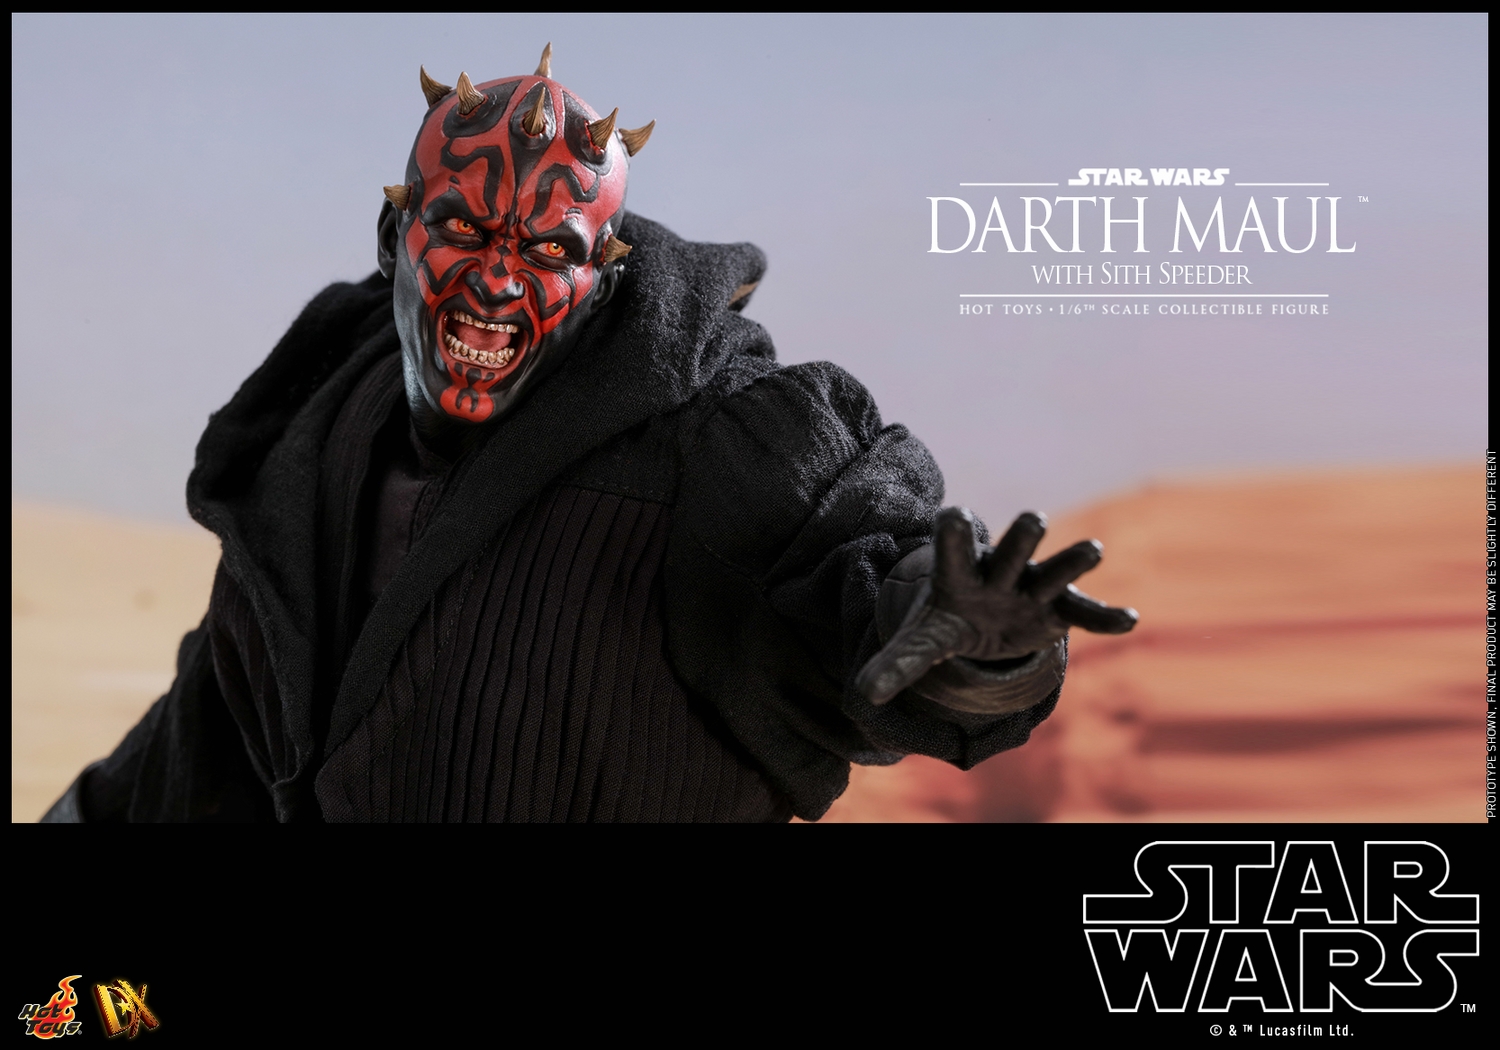 hot-toys-star-wars-1-6-darth-maul-with-sith-speeder-dx17-collectible-figure-007.jpg